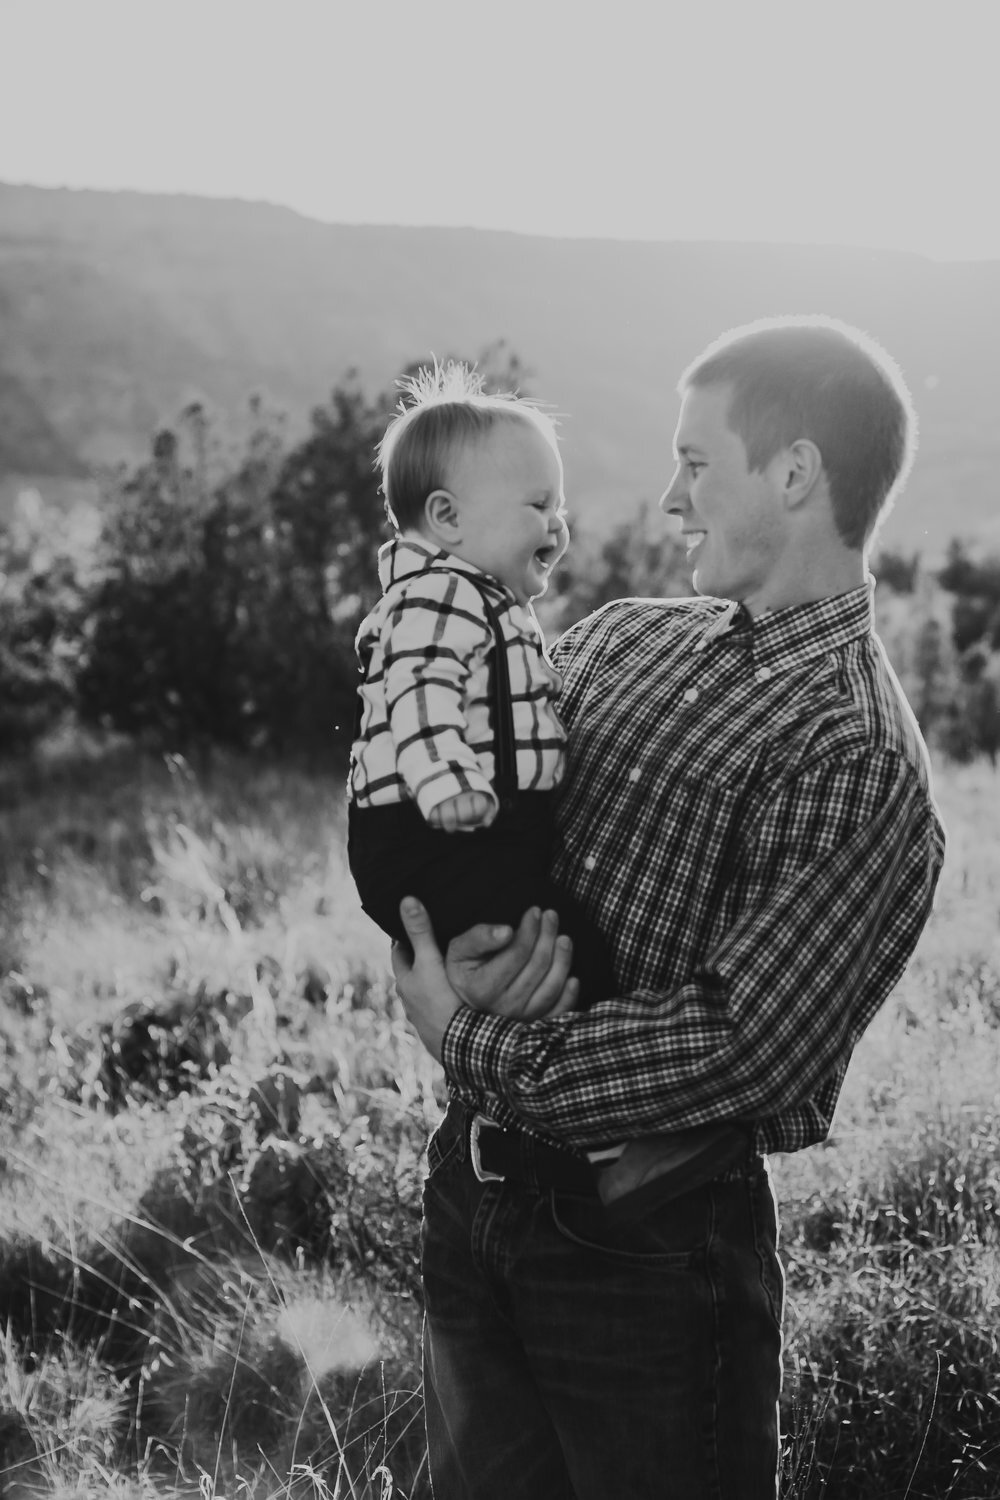  Black and white photo of dad and baby boy at sunset #tealawardphotography #texasfamilyphotographer #amarillophotographer #amarillofamilyphotographer #lifestylephotography #emotionalphotography #familyphotosoot #family #lovingsiblings #purejoy #familyphotos #familyphotographer #greatoutdoors 